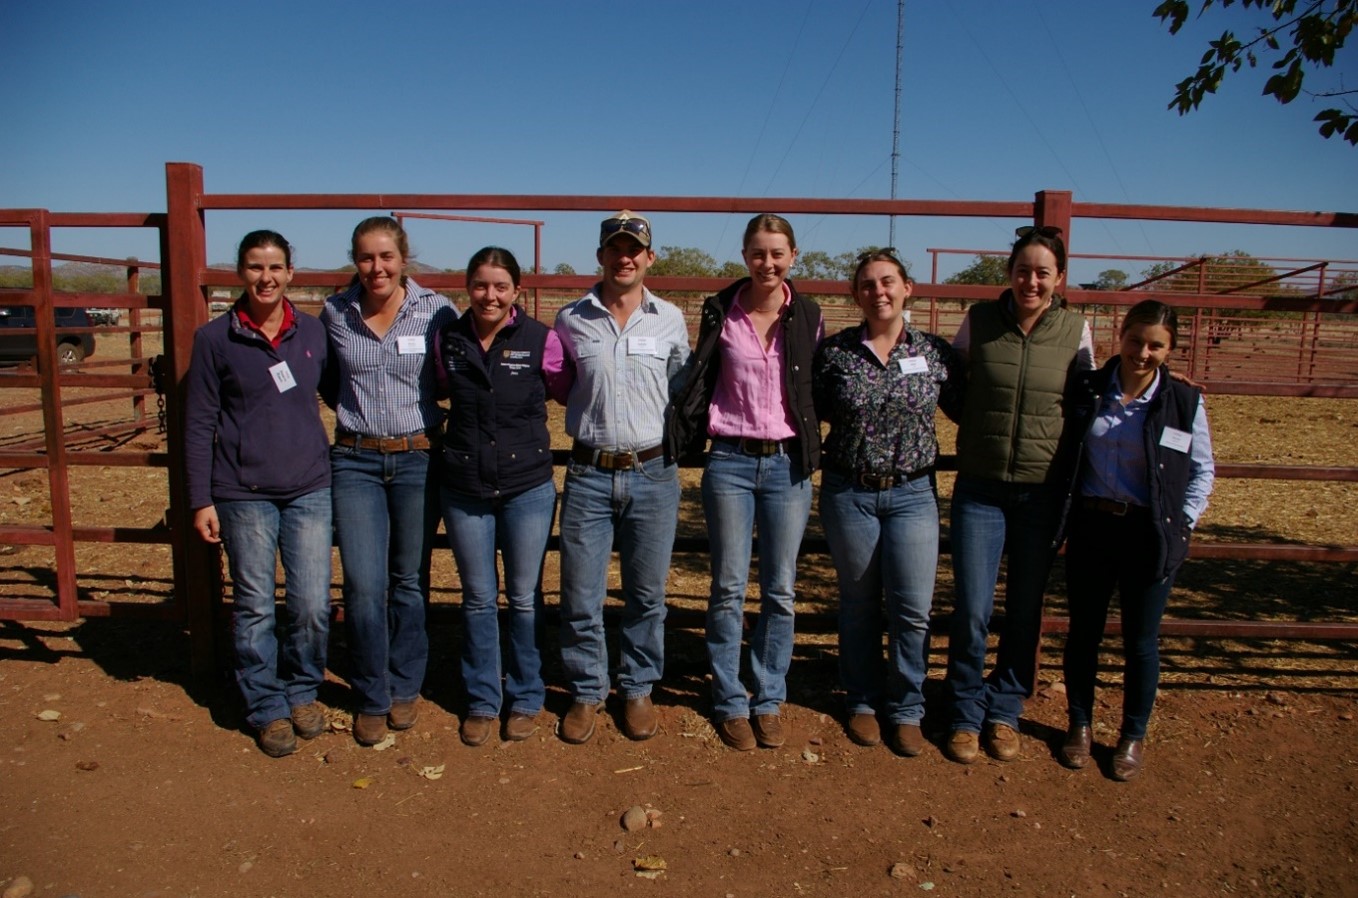 The northern beef extension team study tour allowed them to catch up with their NT and WA counterparts